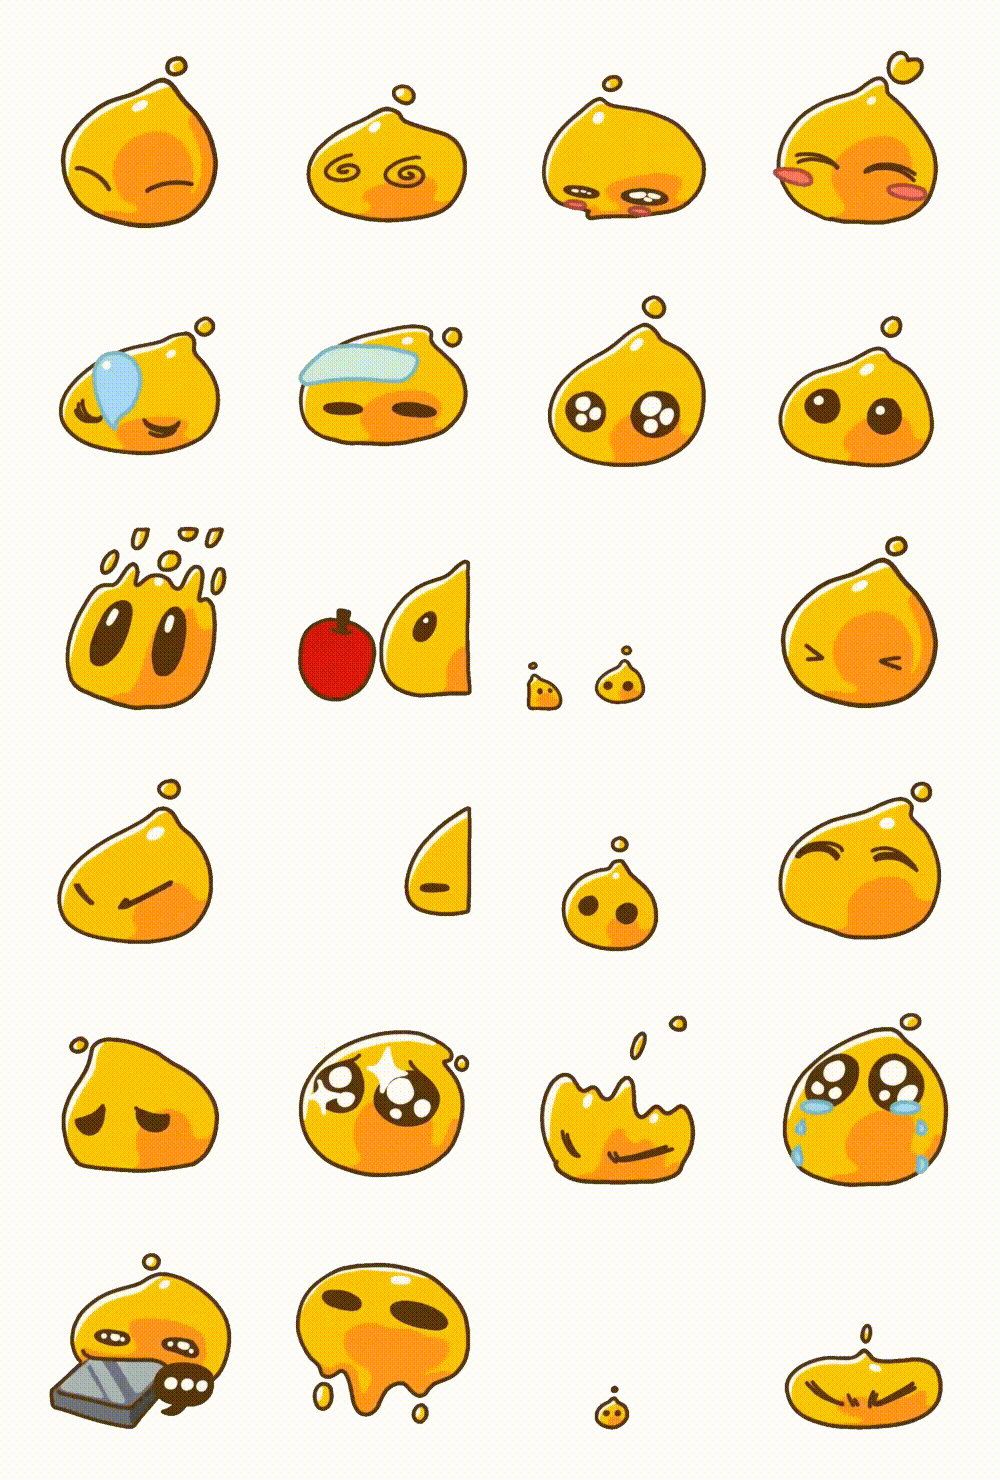 Bouncy Yolk Animation/Cartoon,Gag,Food/Drink,Etc sticker pack for Whatsapp, Telegram, Signal, and others chatting and message apps